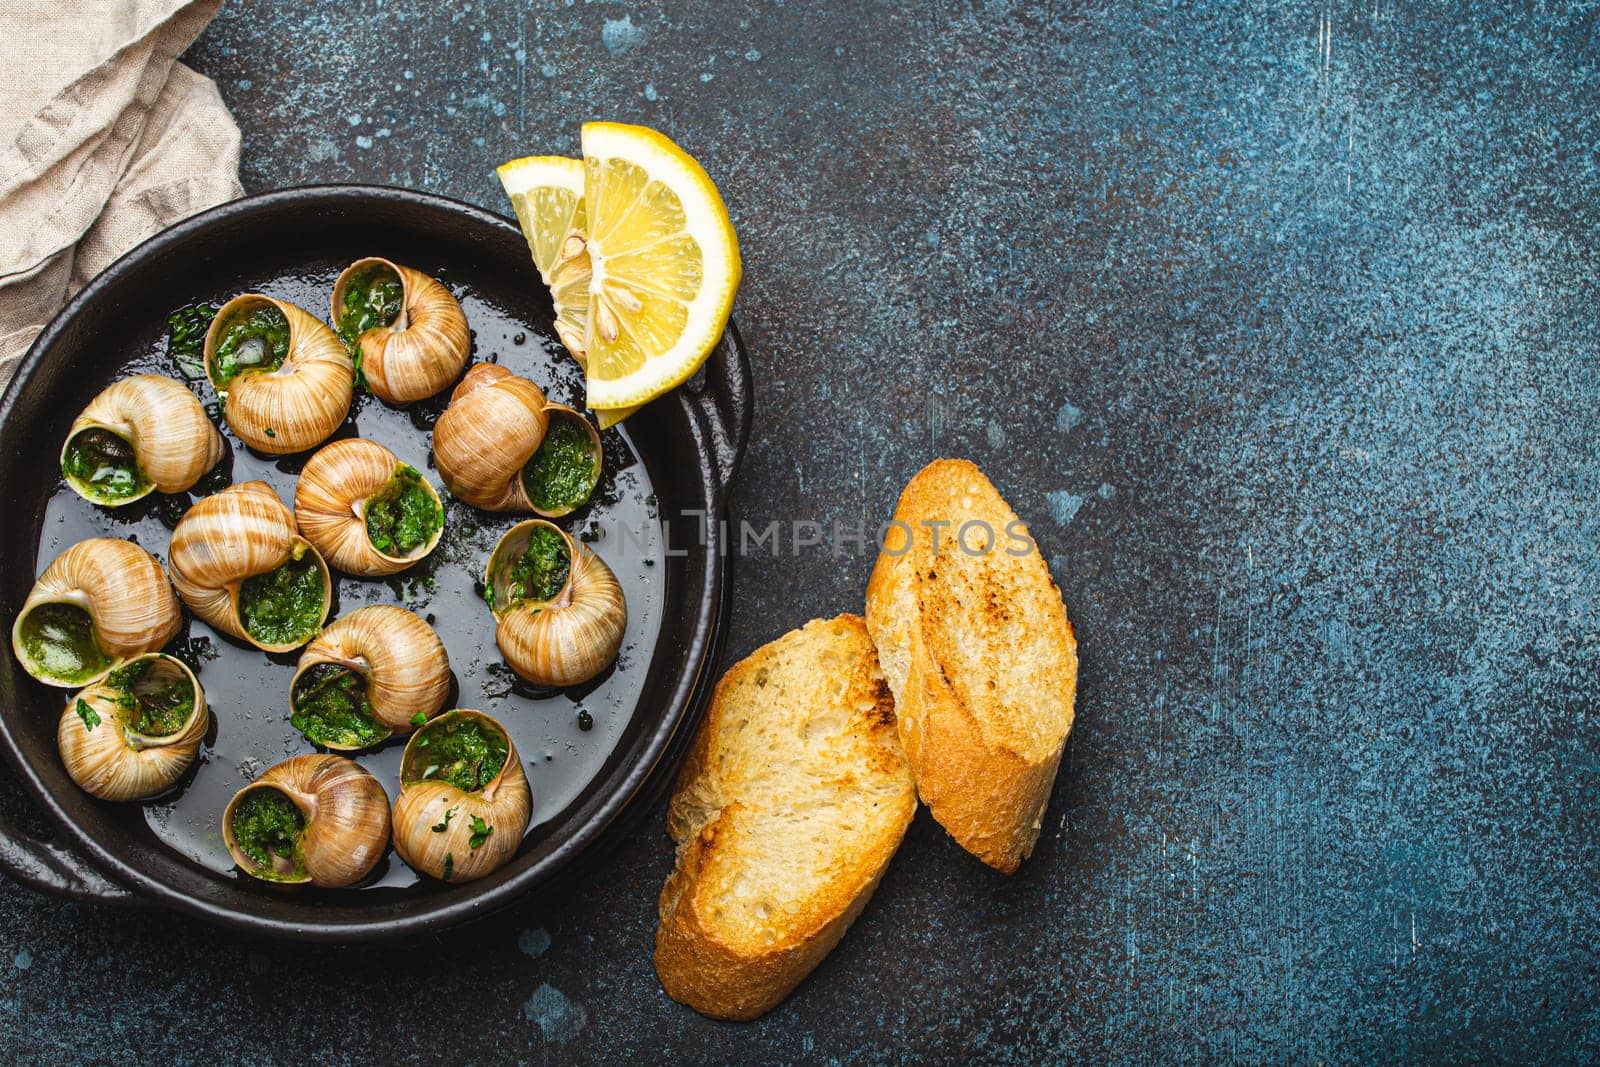 Escargots de Bourgogne Snails with Garlic Butter and Parsley in black cast iron pan with Lemon and Toasted Baguette Slices on rustic stone background top view, traditional French Delicacy, copy space.